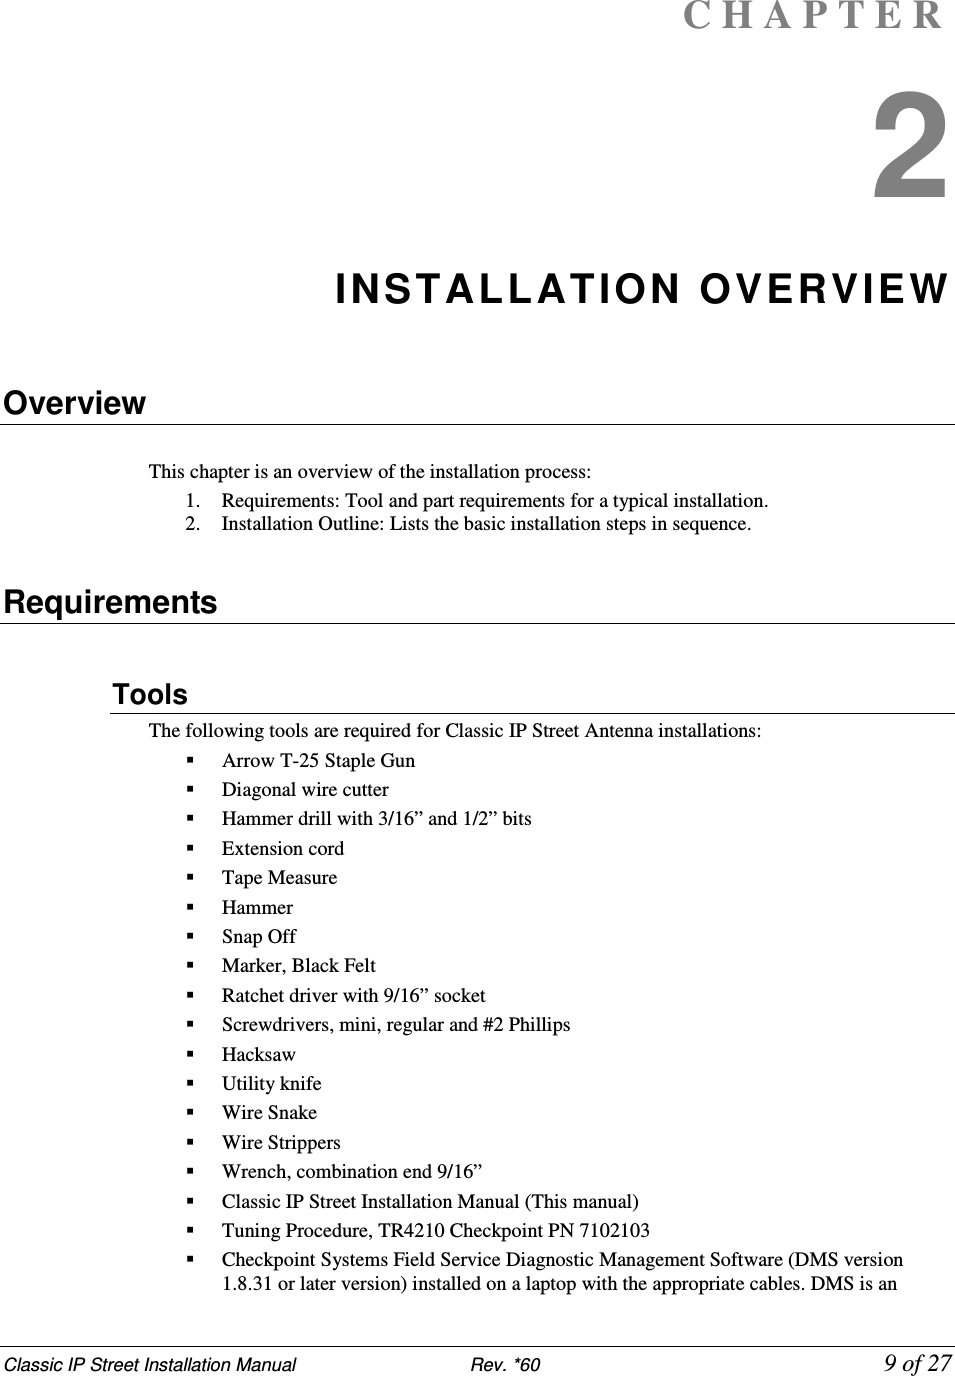 Classic IP Street Installation Manual                           Rev. *60             9 of 27 C H A P T E R  2 INSTALL ATION OVERVIEW  Overview  This chapter is an overview of the installation process:  1. Requirements: Tool and part requirements for a typical installation.  2. Installation Outline: Lists the basic installation steps in sequence.   Requirements  Tools  The following tools are required for Classic IP Street Antenna installations:  Arrow T-25 Staple Gun  Diagonal wire cutter   Hammer drill with 3/16” and 1/2” bits  Extension cord   Tape Measure  Hammer  Snap Off   Marker, Black Felt   Ratchet driver with 9/16” socket  Screwdrivers, mini, regular and #2 Phillips   Hacksaw  Utility knife  Wire Snake  Wire Strippers   Wrench, combination end 9/16”  Classic IP Street Installation Manual (This manual)  Tuning Procedure, TR4210 Checkpoint PN 7102103  Checkpoint Systems Field Service Diagnostic Management Software (DMS version 1.8.31 or later version) installed on a laptop with the appropriate cables. DMS is an 